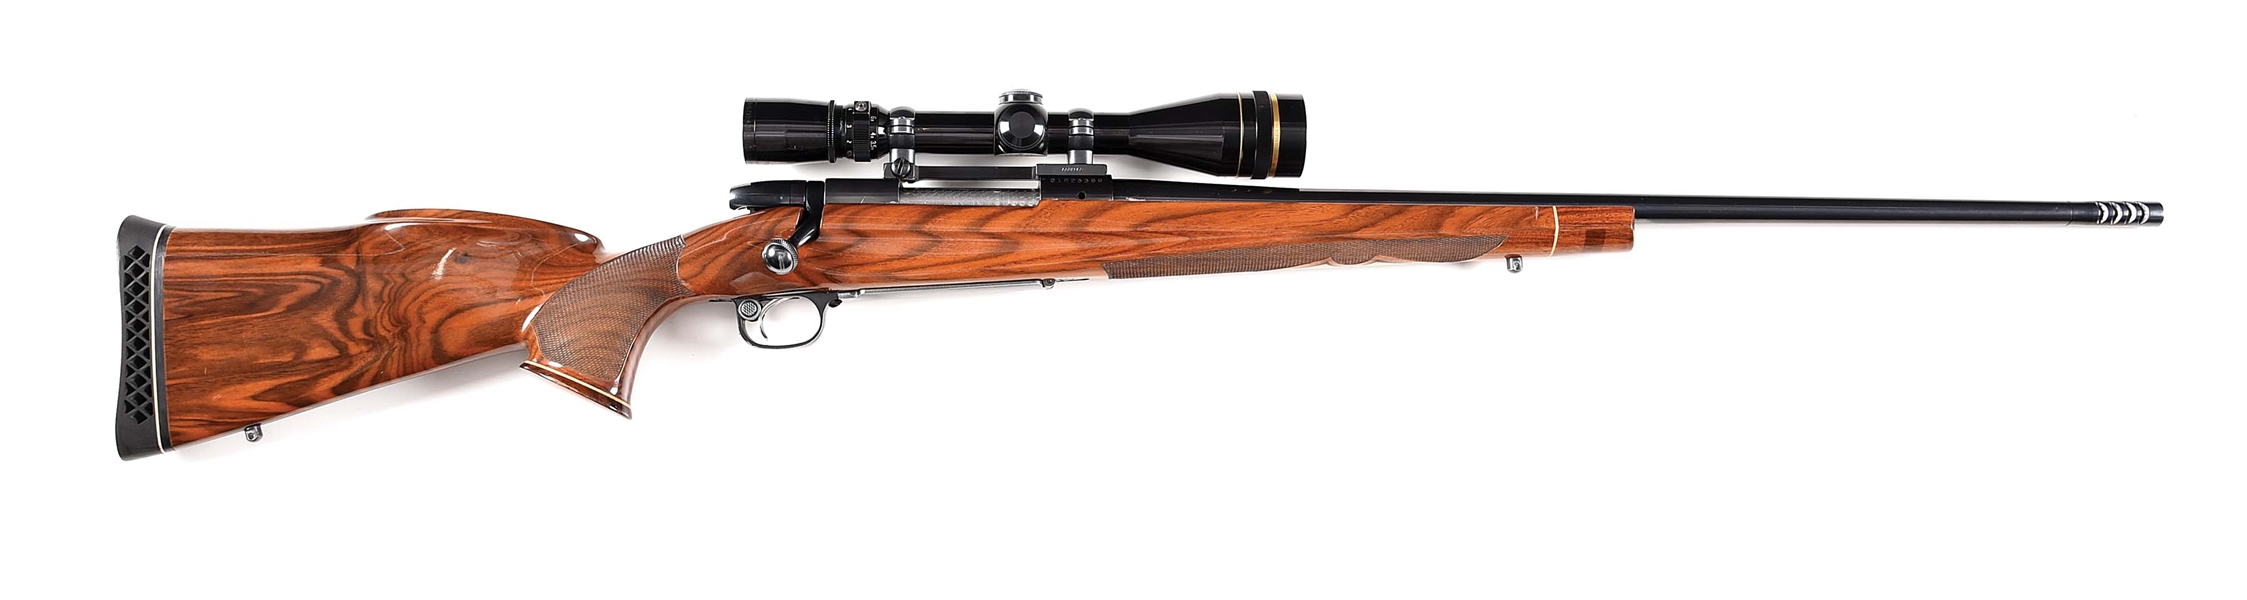 (M) CUSTOM WINCHESTER MODEL 70 XTR BOLT ACTION RIFLE WITH LEUPOLD SCOPE.